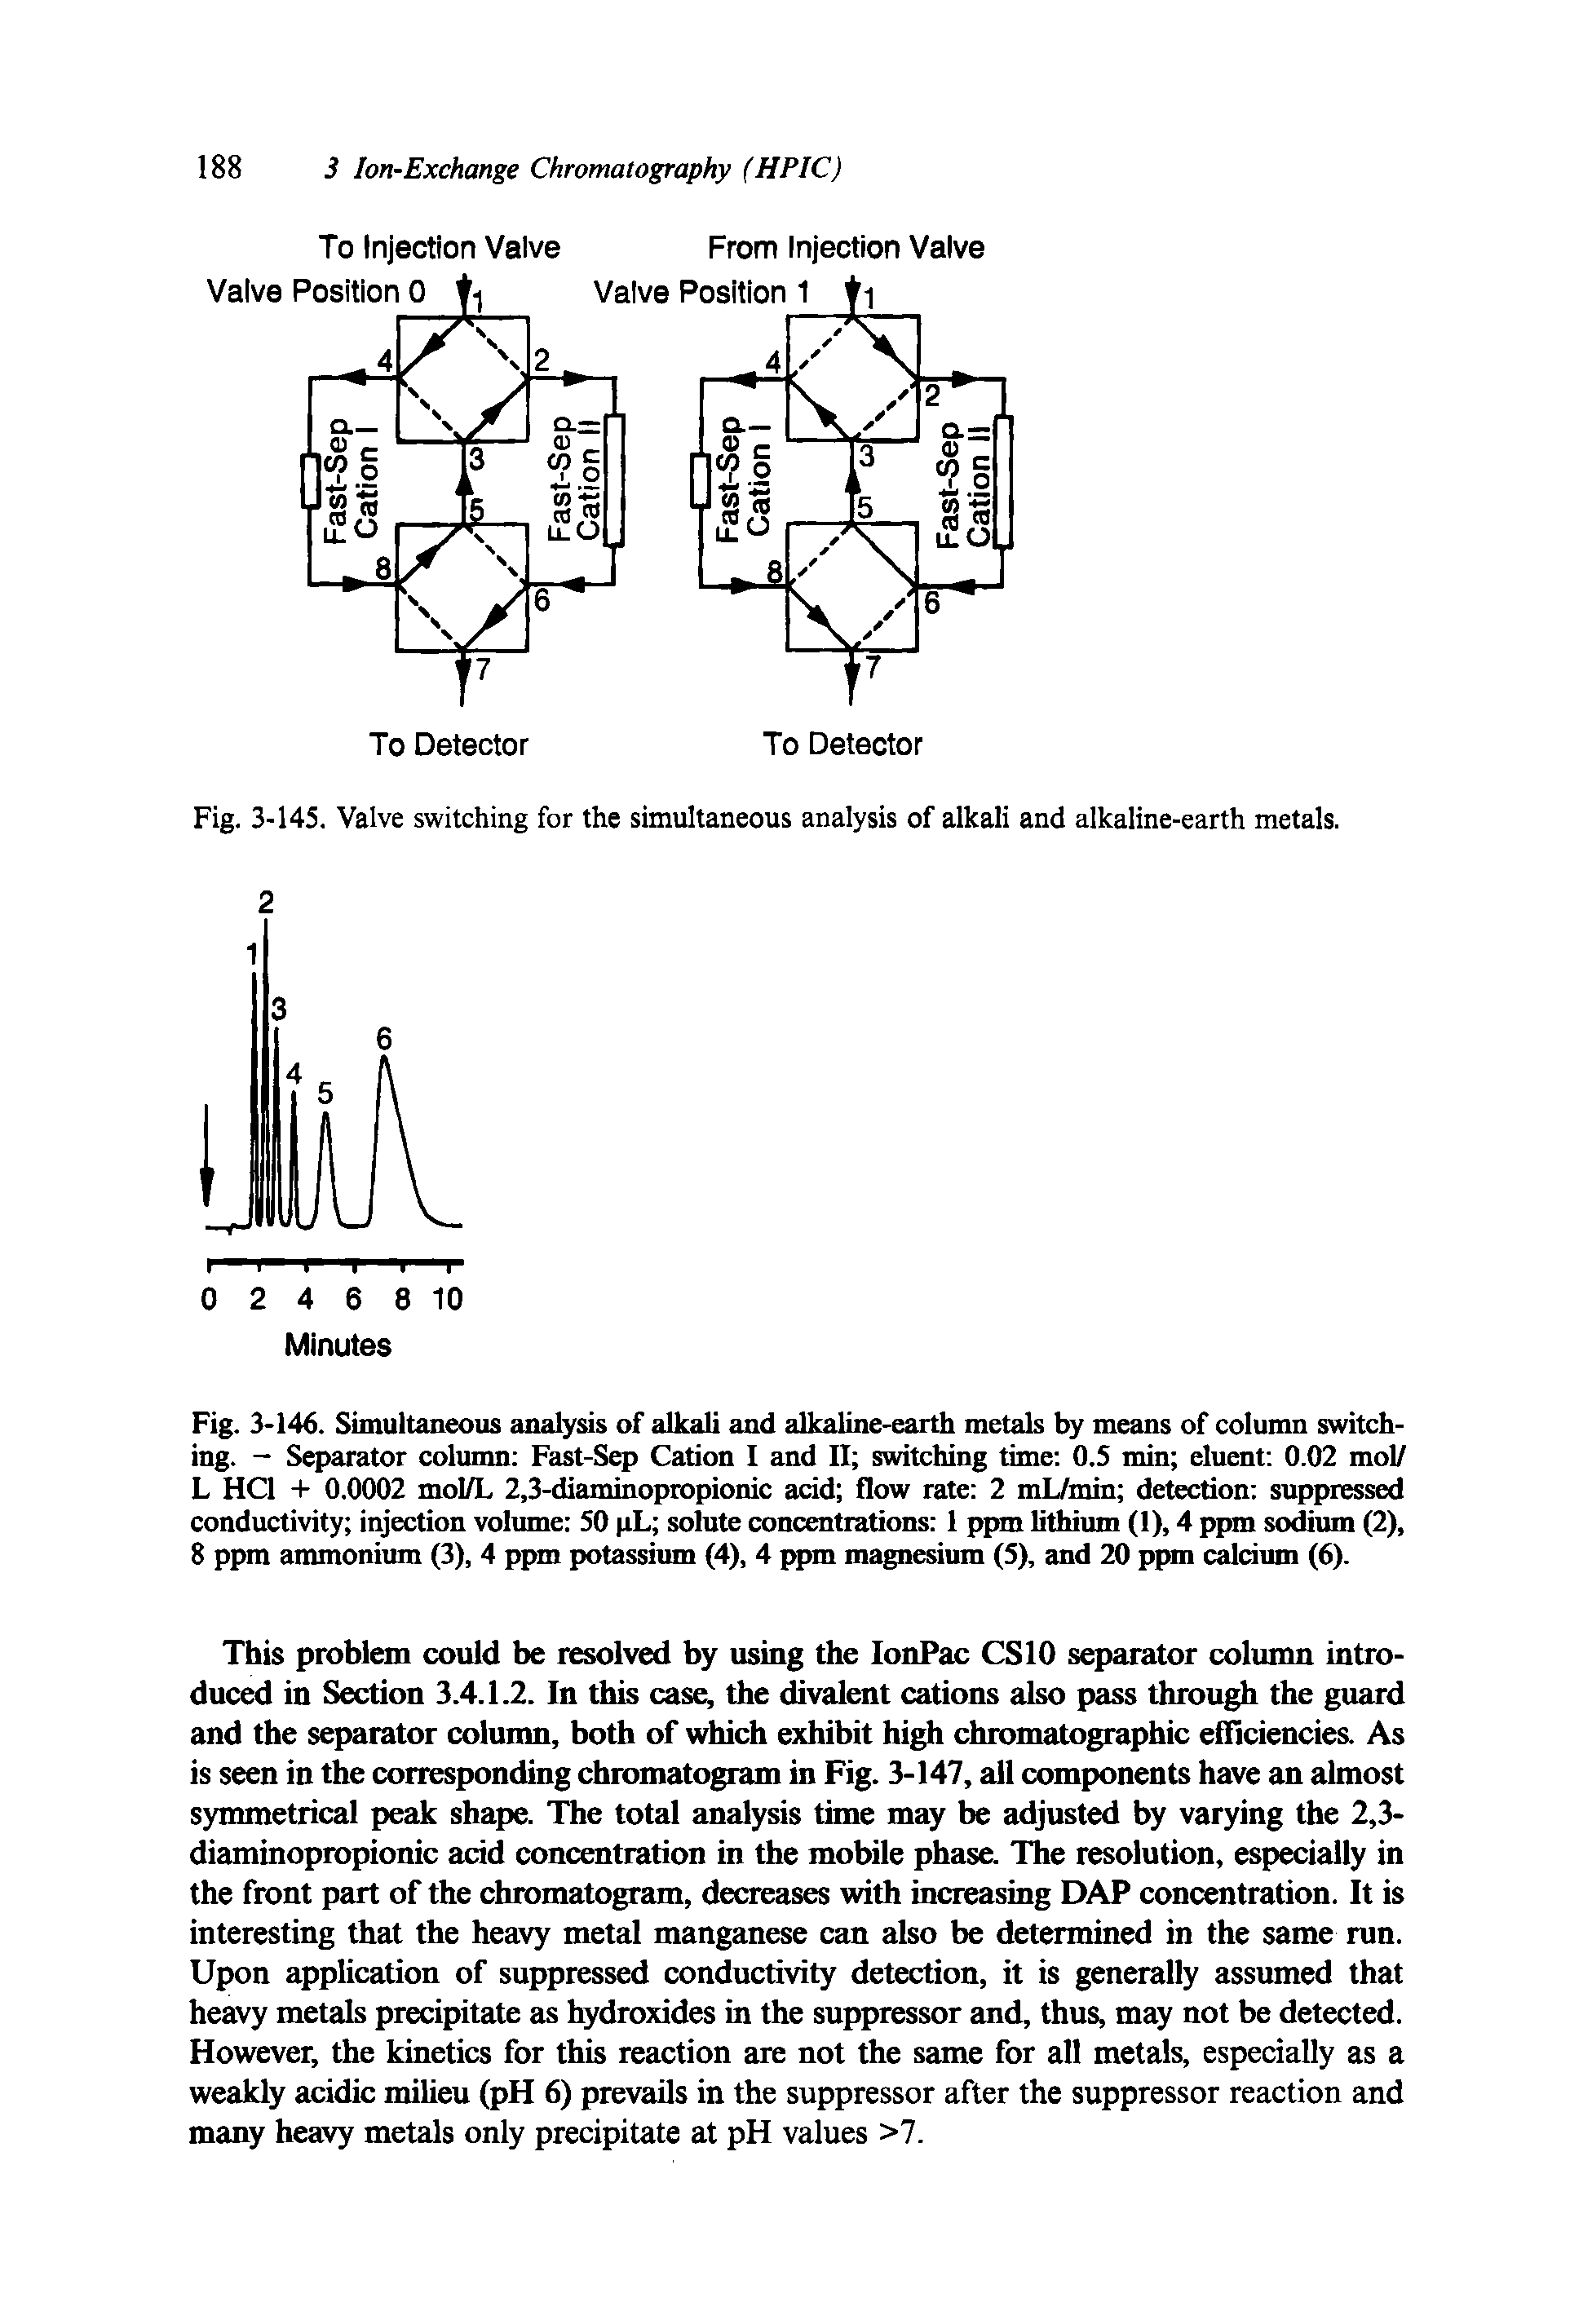 Fig. 3-146. Simultaneous analysis of alkali and alkaline-earth metals by means of column switching. - Separator column Fast-Sep Cation I and II switching time 0.5 min eluent 0.02 mol/ L HC1 + 0.0002 moI/L 2,3-diaminopropionic acid flow rate 2 mL/min detection suppressed conductivity injection volume 50 pL solute concentrations 1 ppm lithium (1), 4 ppm sodium (2), 8 ppm ammonium (3), 4 ppm potassium (4), 4 ppm magnesium (5), and 20 ppm calcium (6).